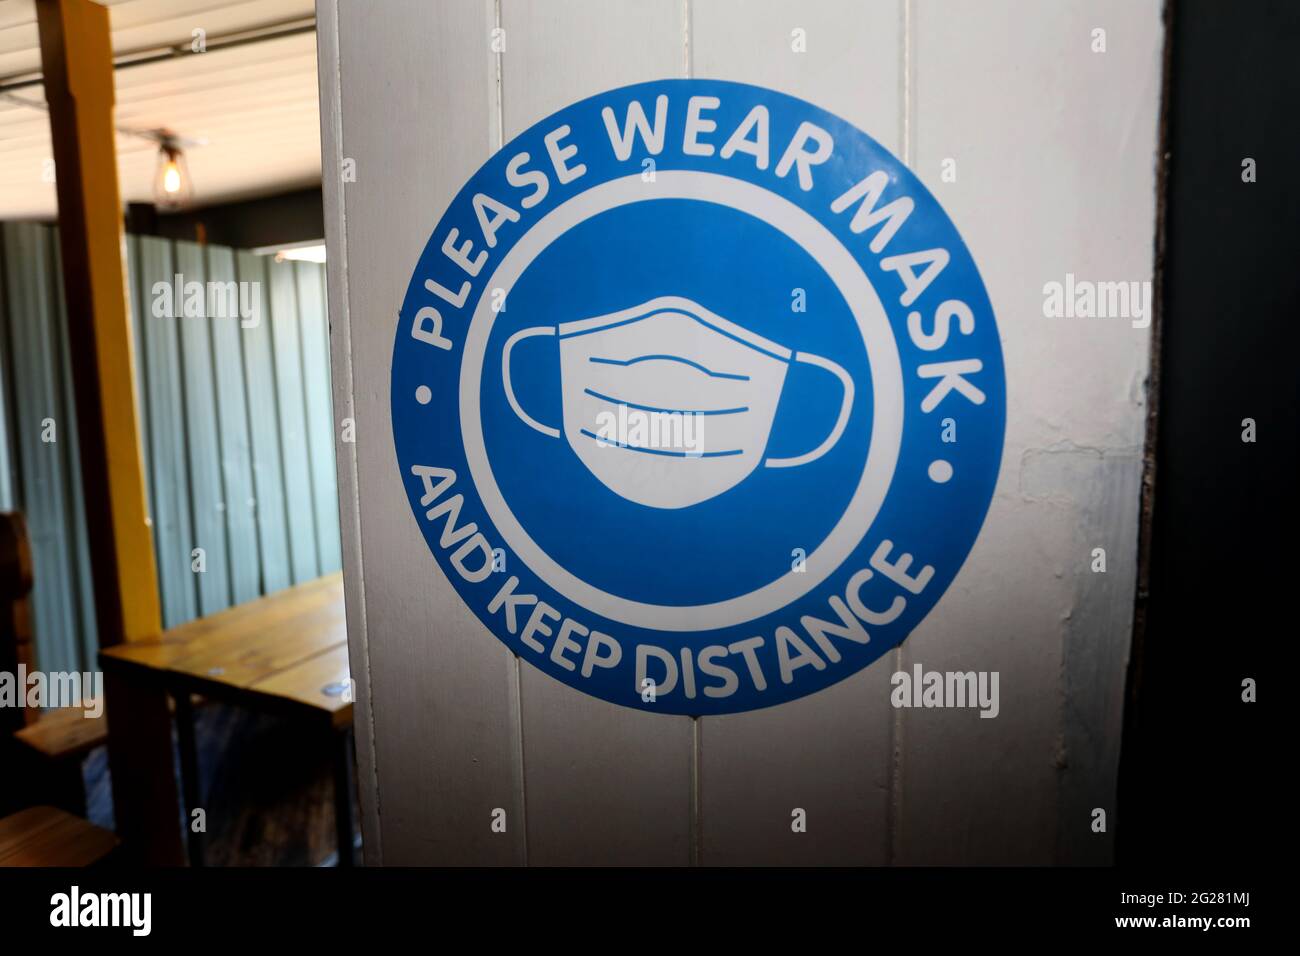 Please wear a mask sign in a pub in Portsmouth, Hampshire, UK. Stock Photo